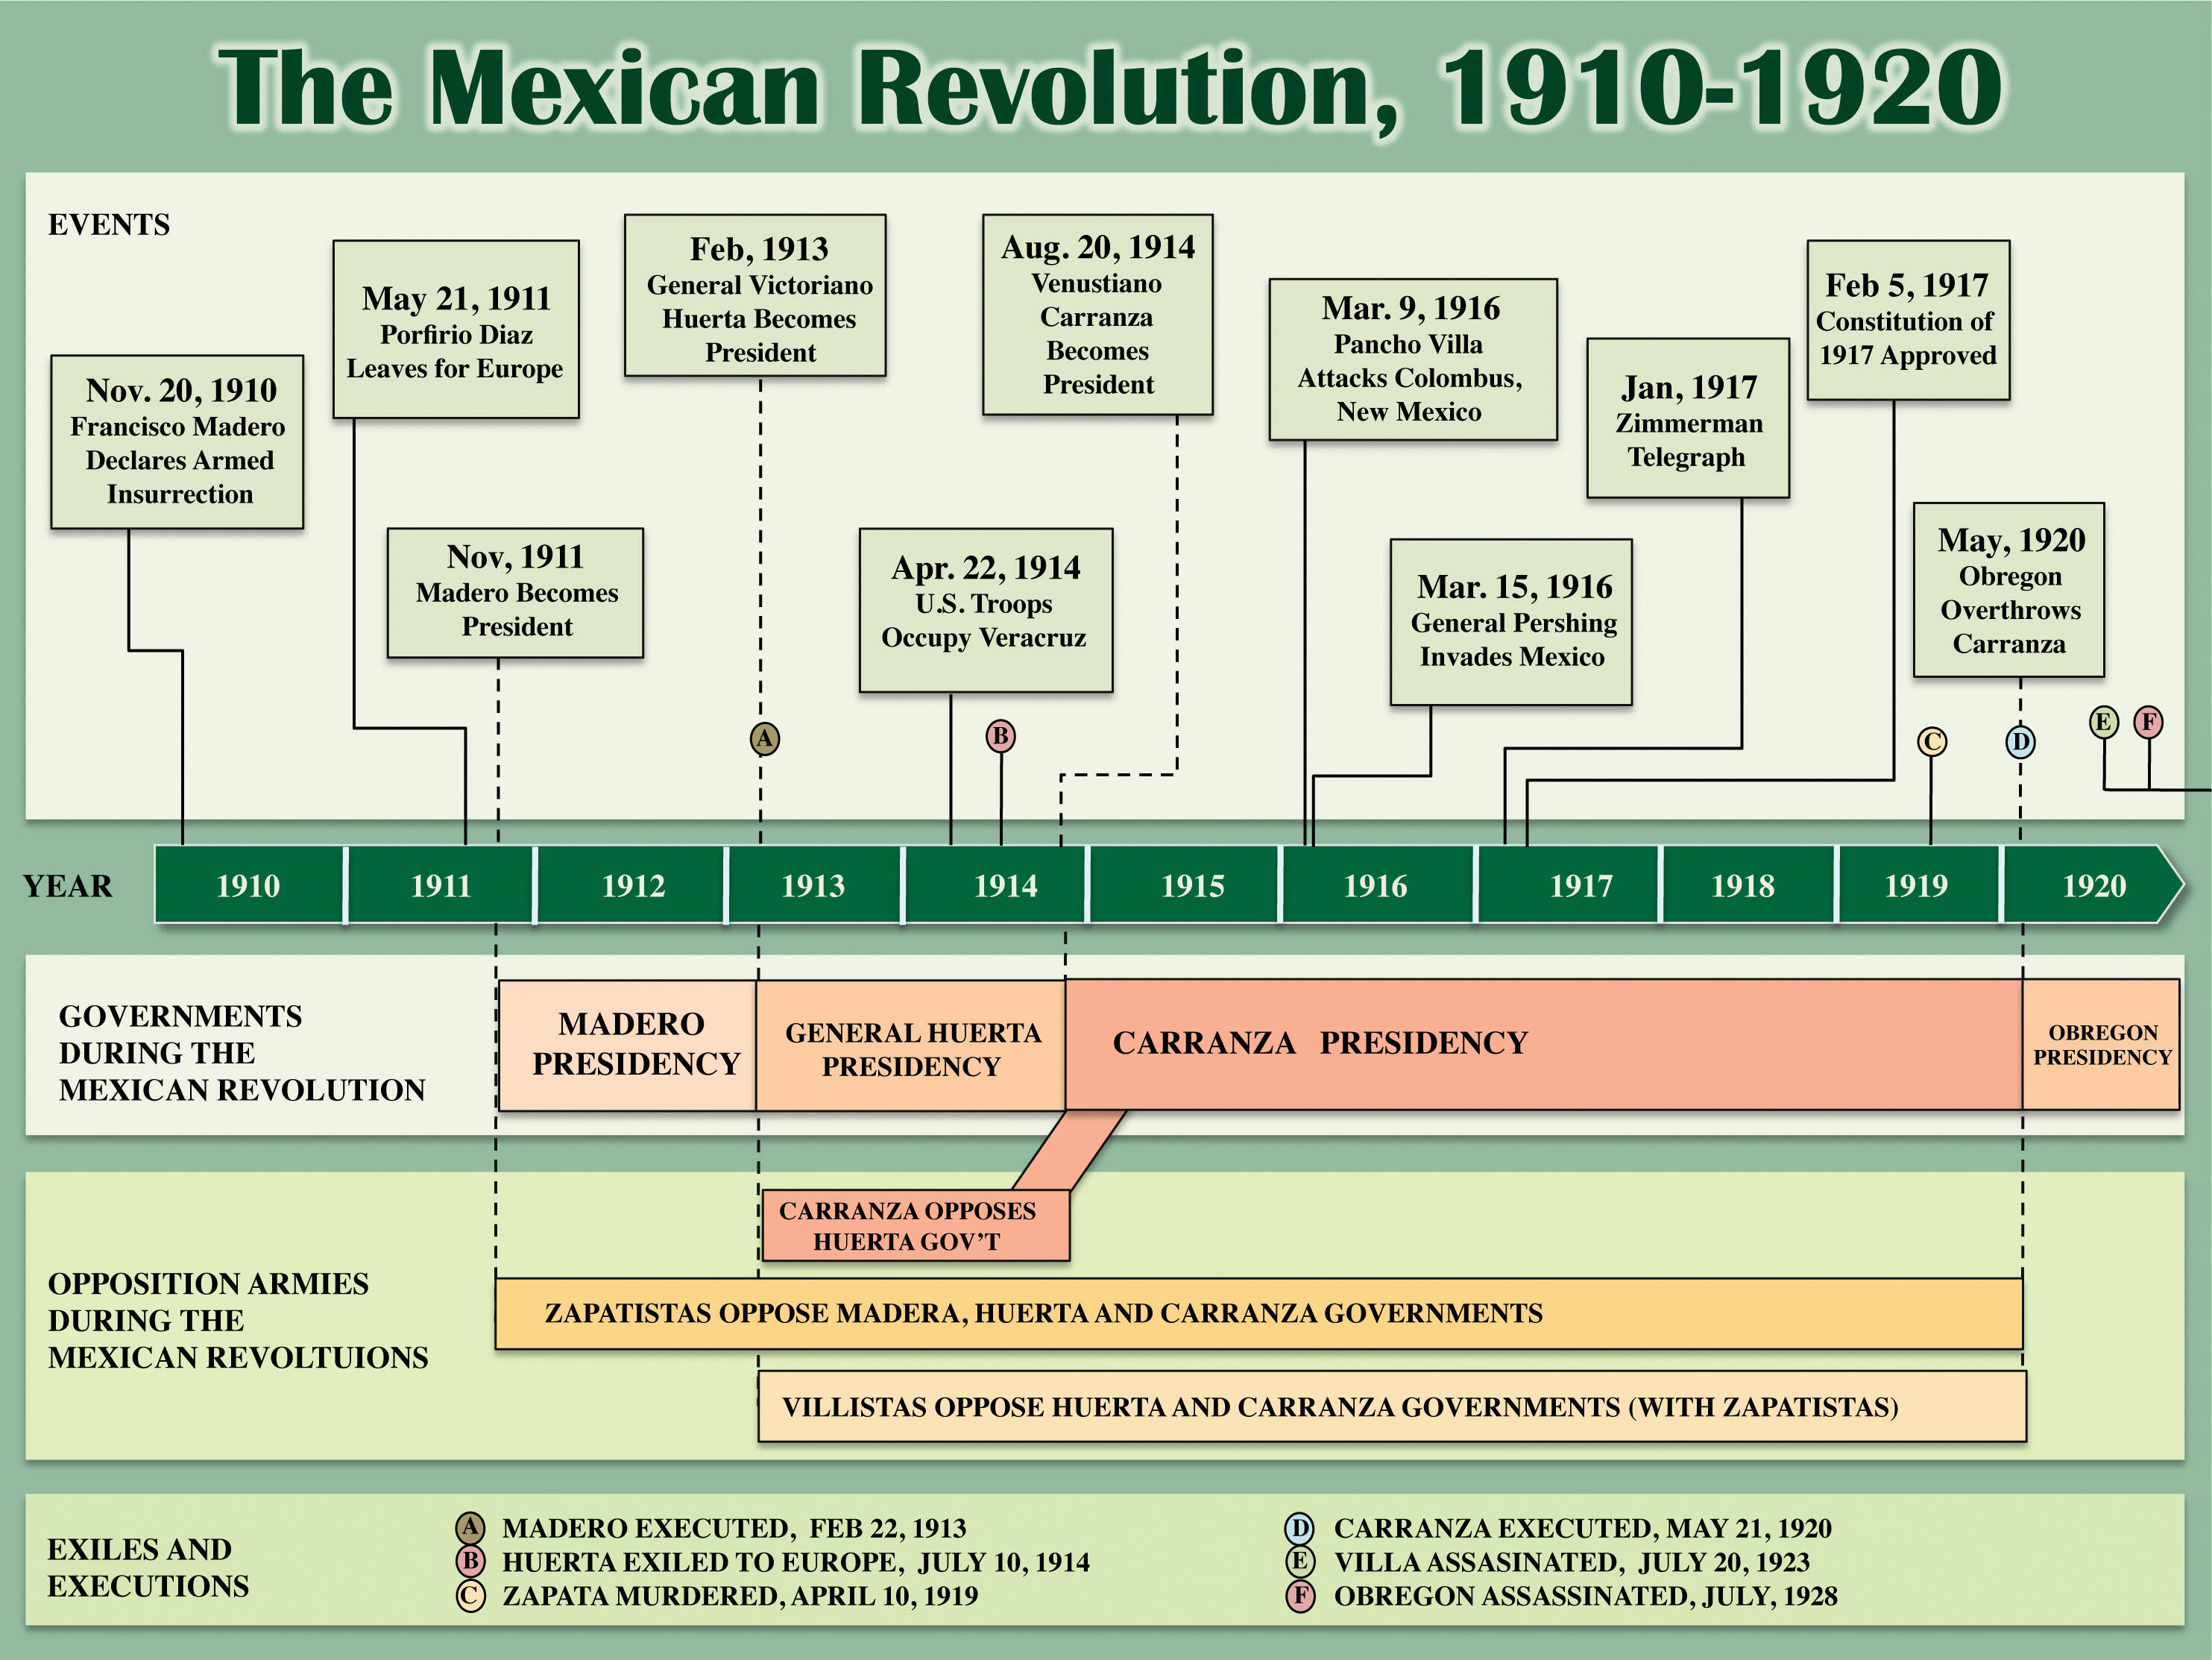 A timeline of major events of the Mexican Revolution, showing the reigns of various administrations.